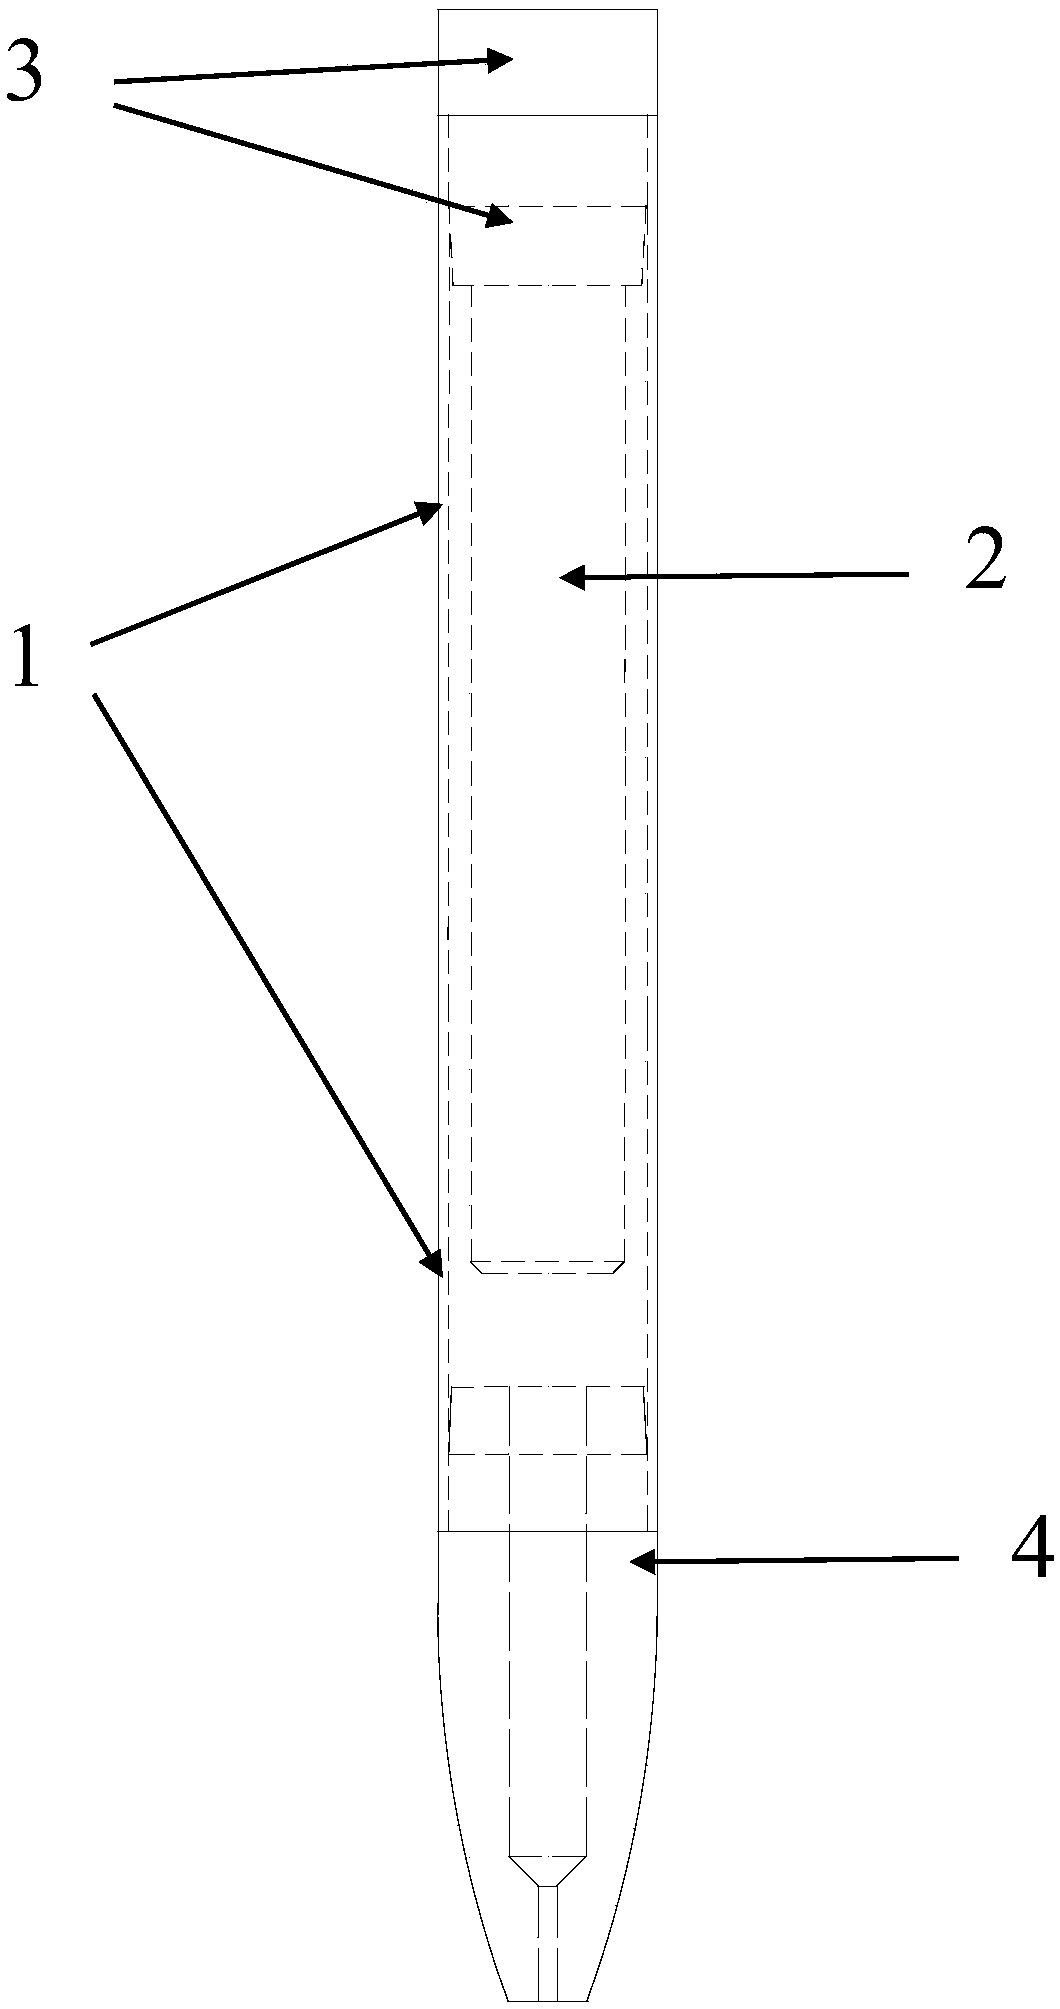 Test device for metal material creep under in-reactor radiation environment